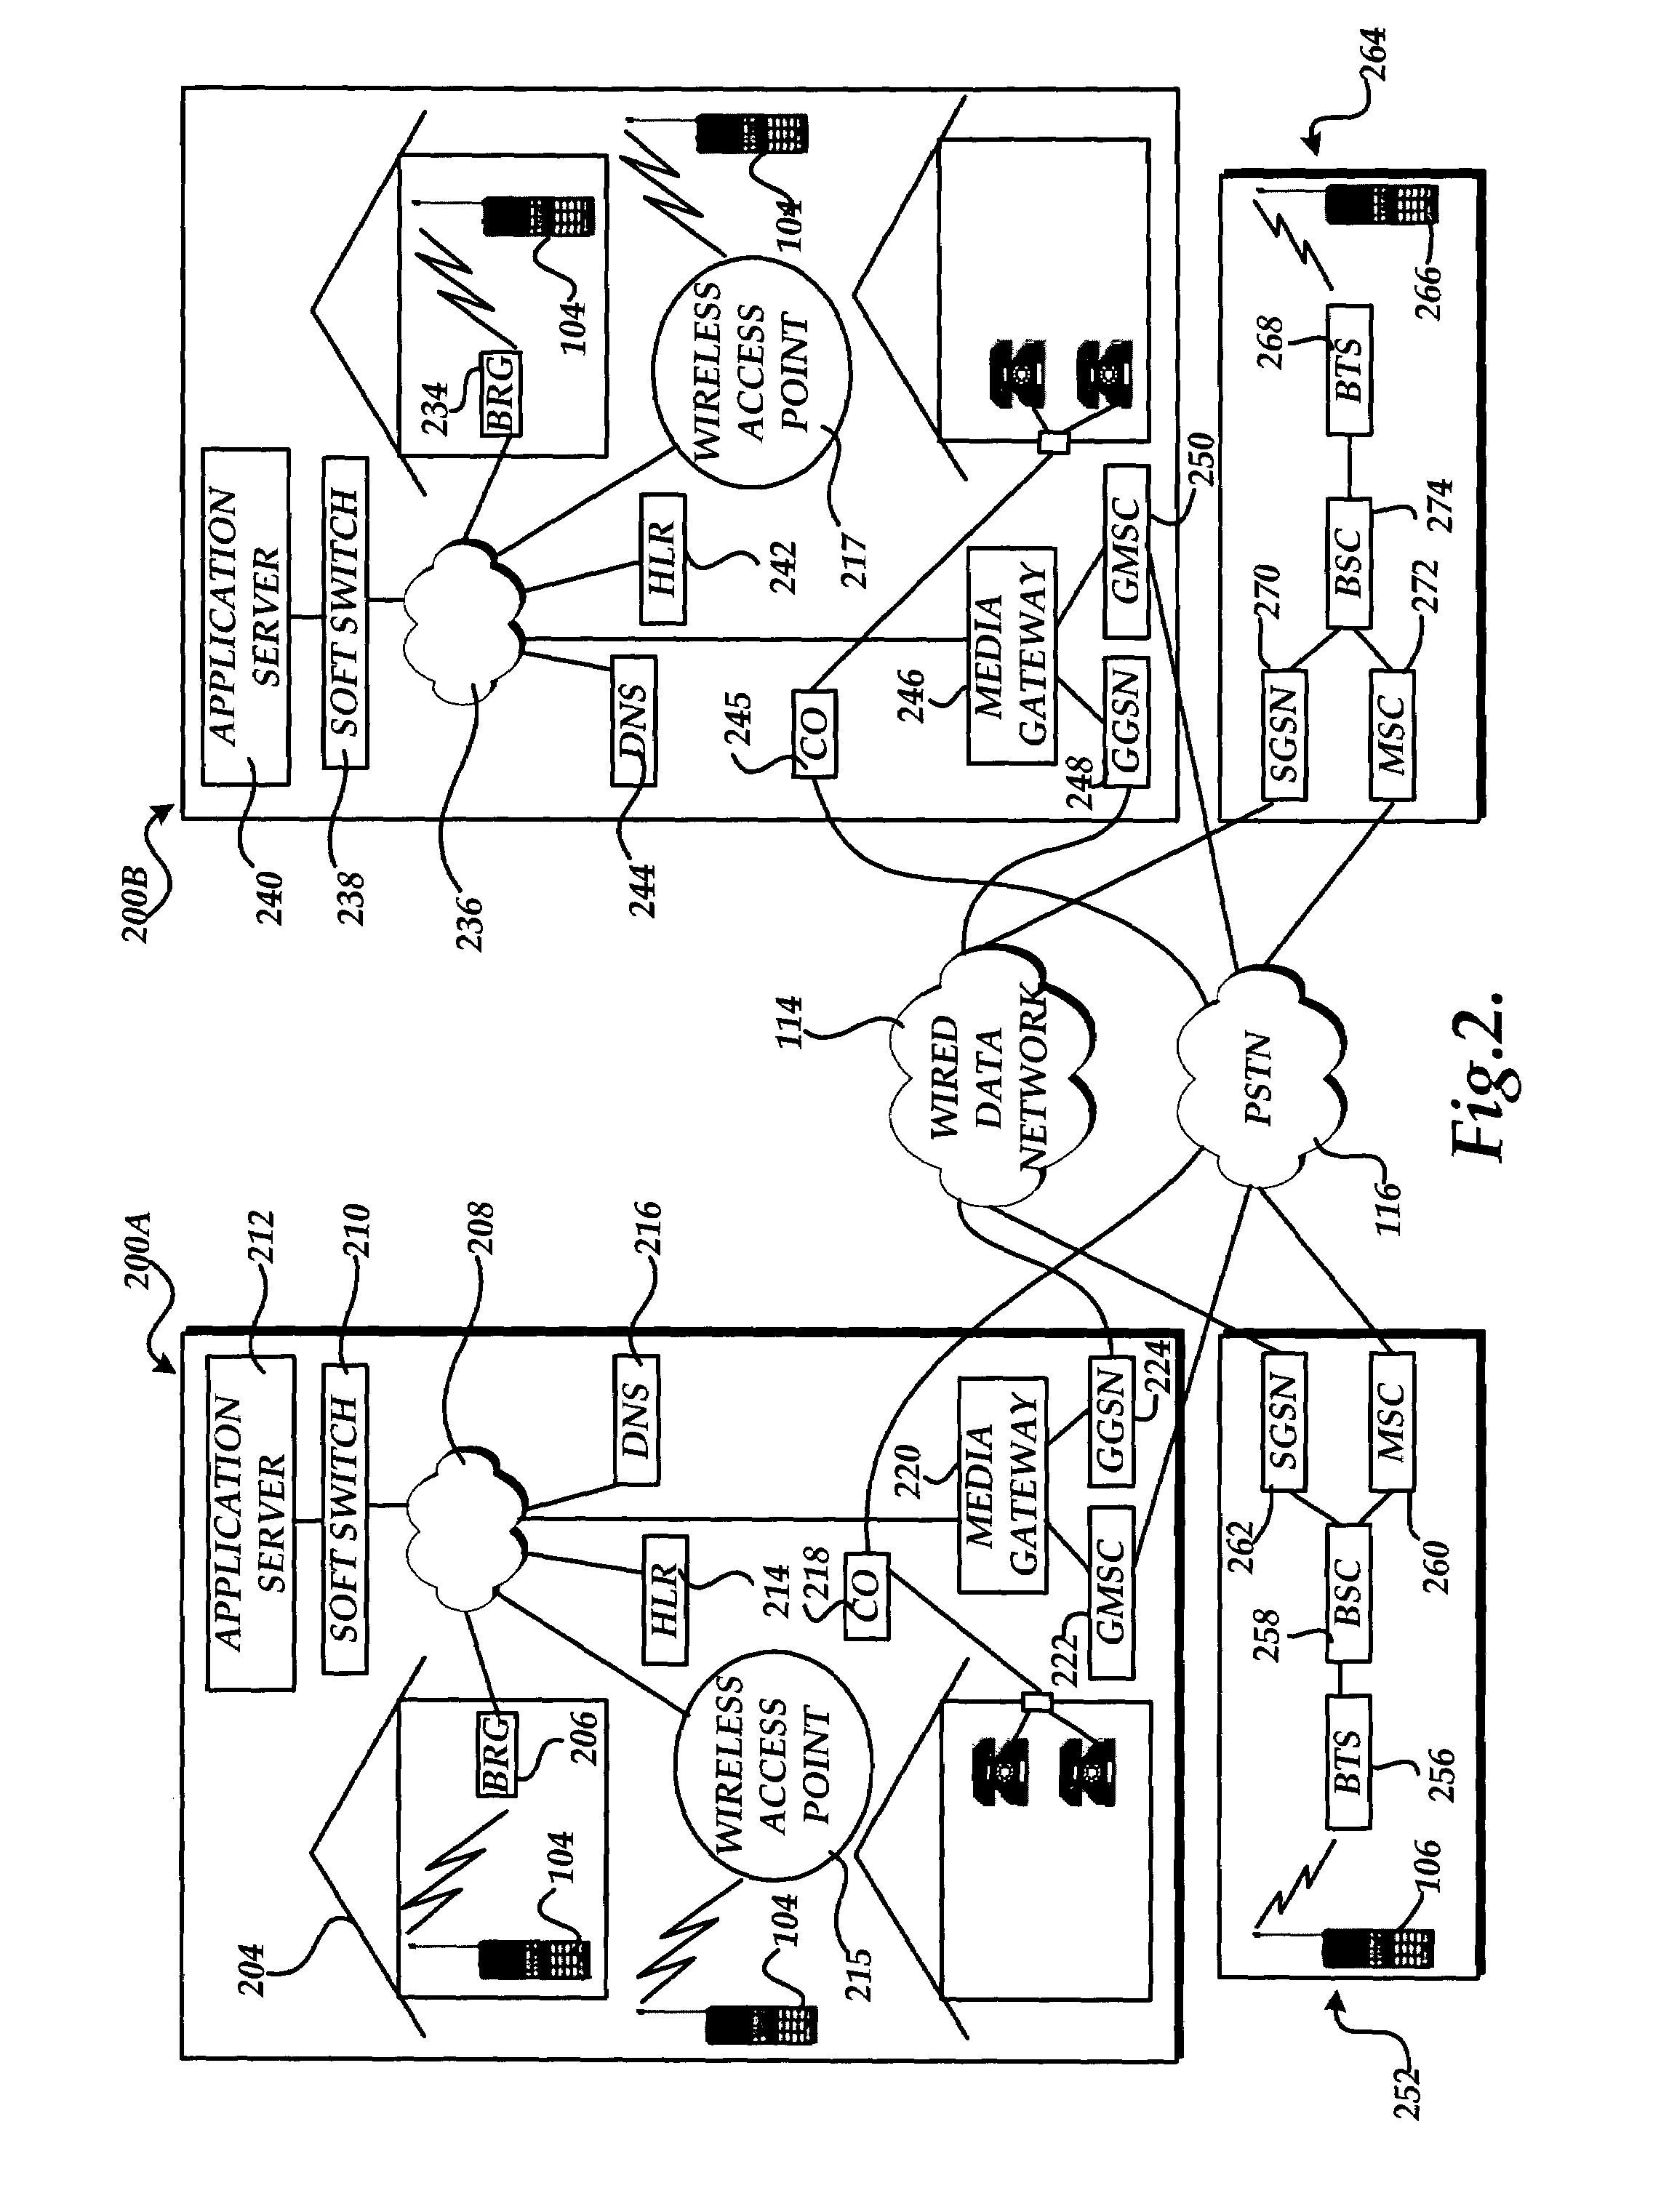 System and method for providing integrated voice and data services utilizing wired cordless access with unlicensed/unregulated spectrum and wired access with licensed/regulated spectrum